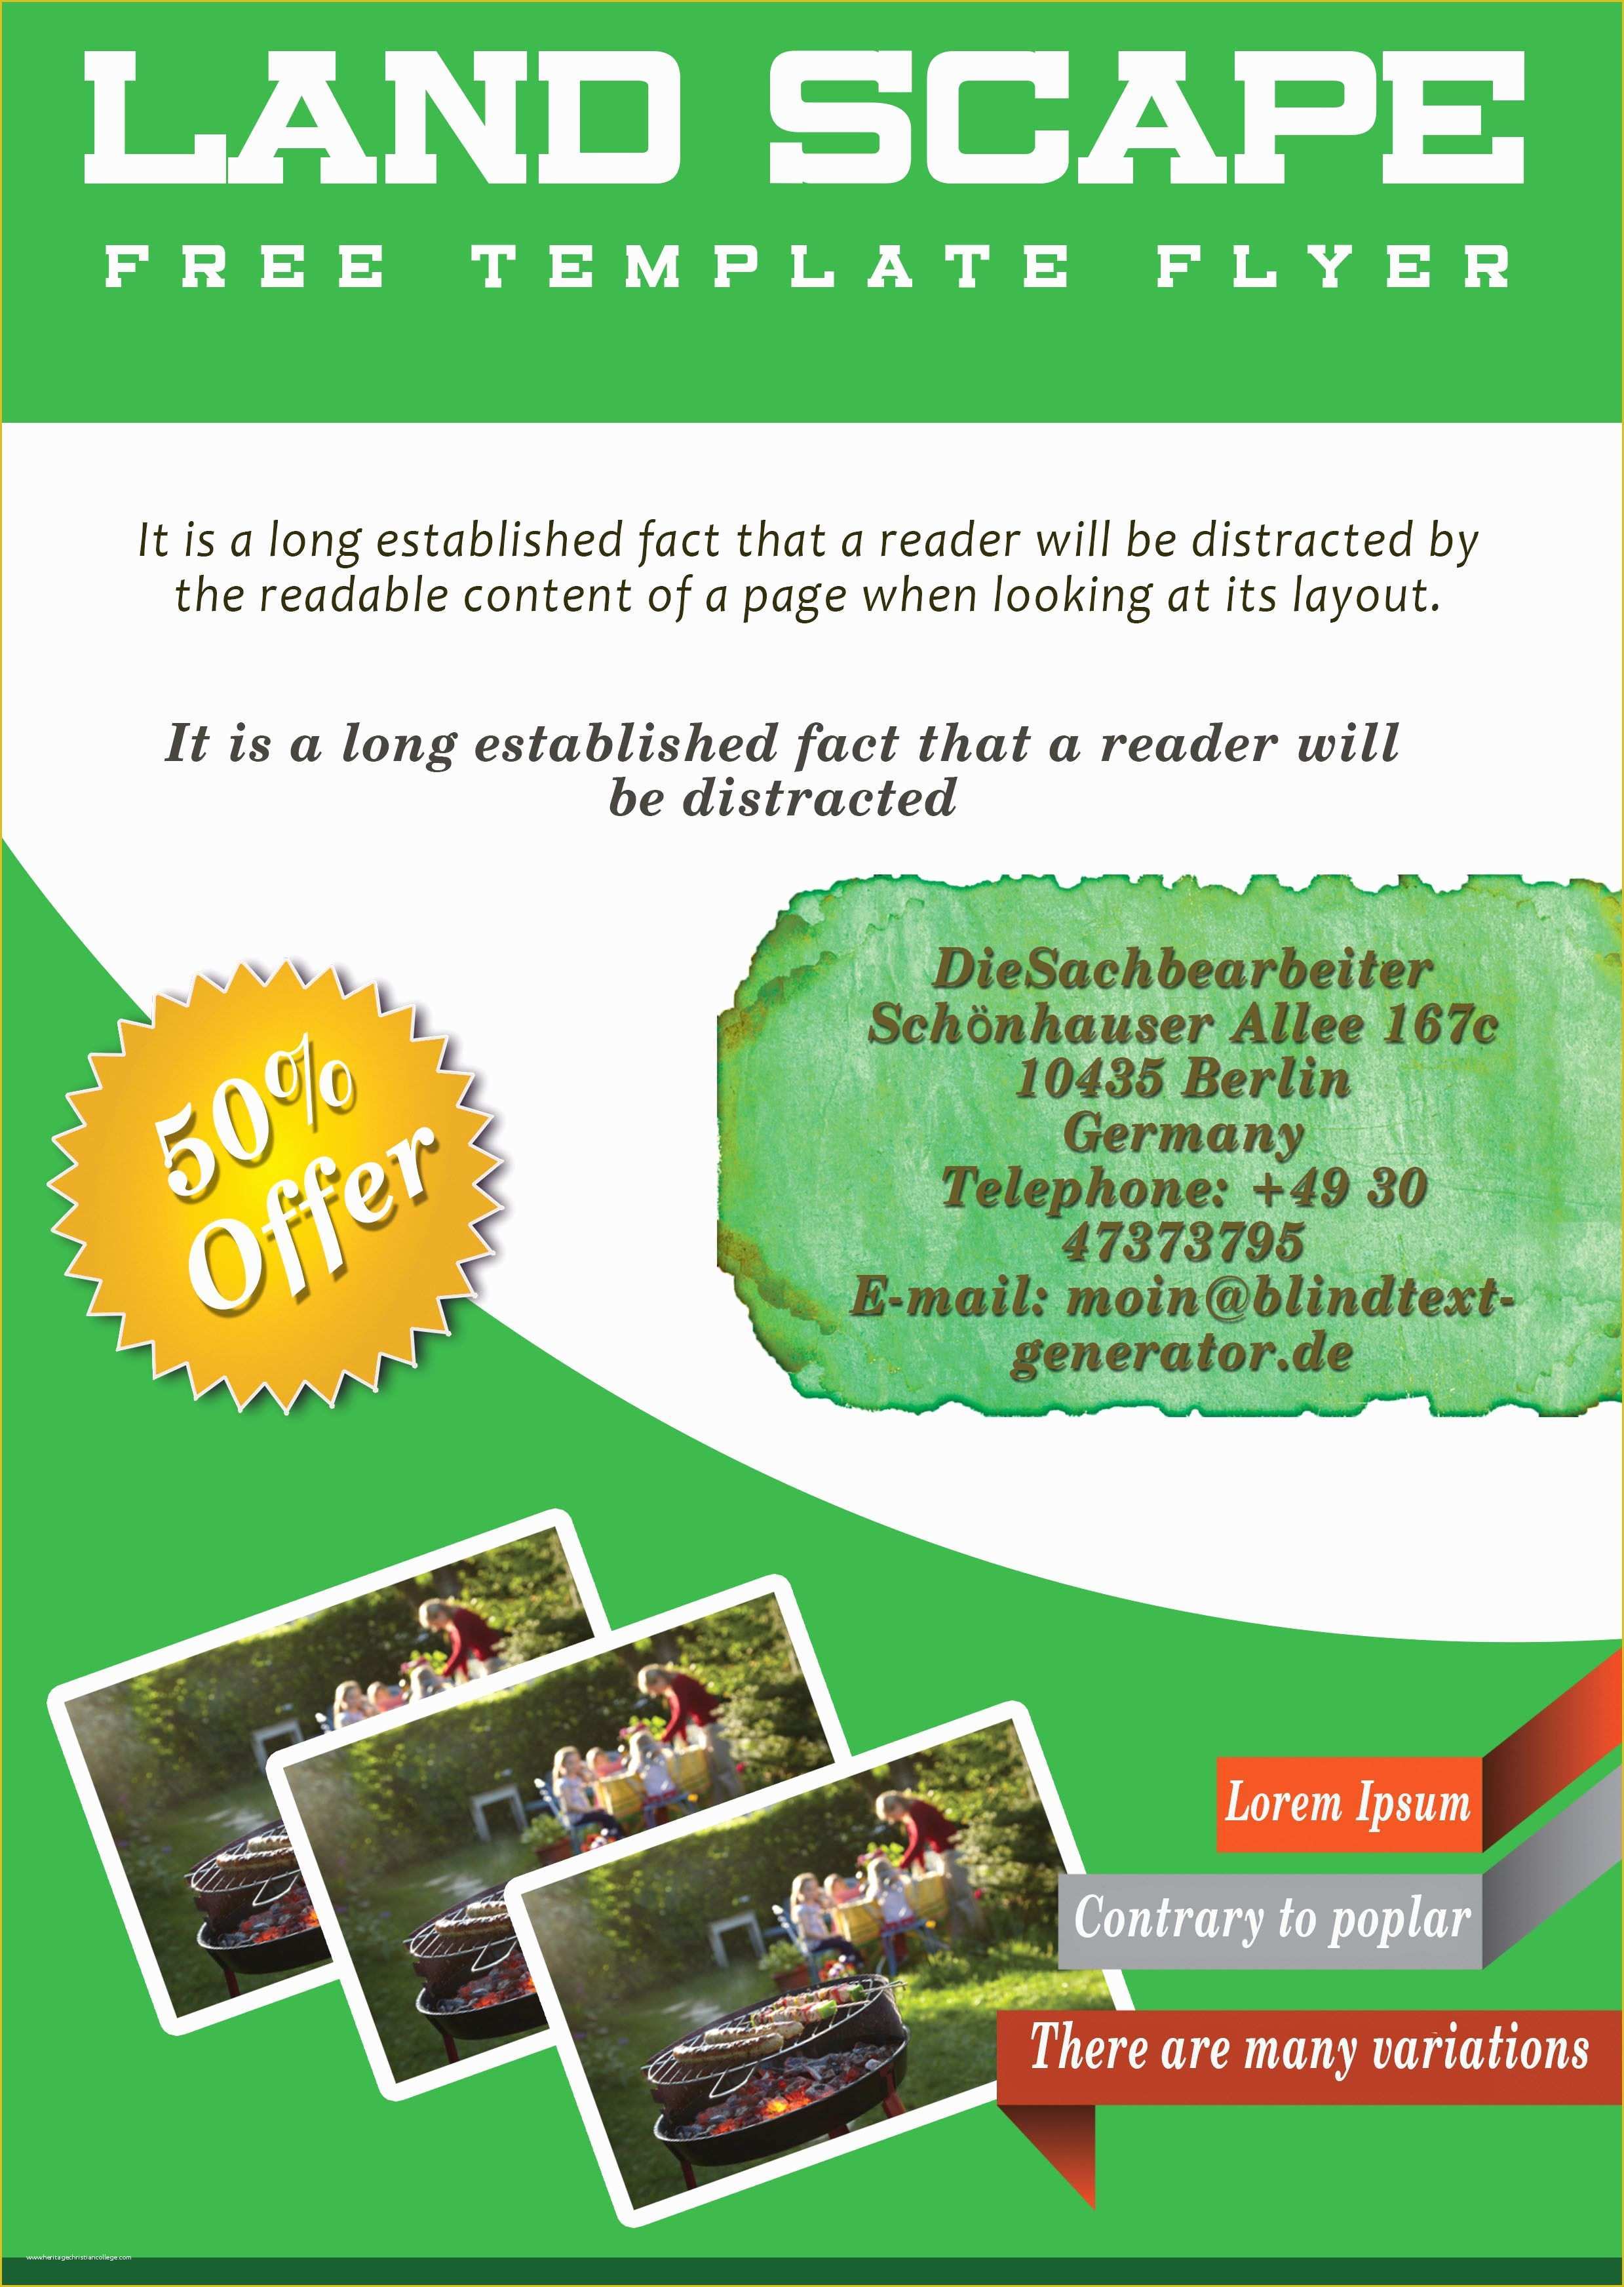 Ad Templates Free Of Free Landscaping Flyer Templates to Power Lawn Care